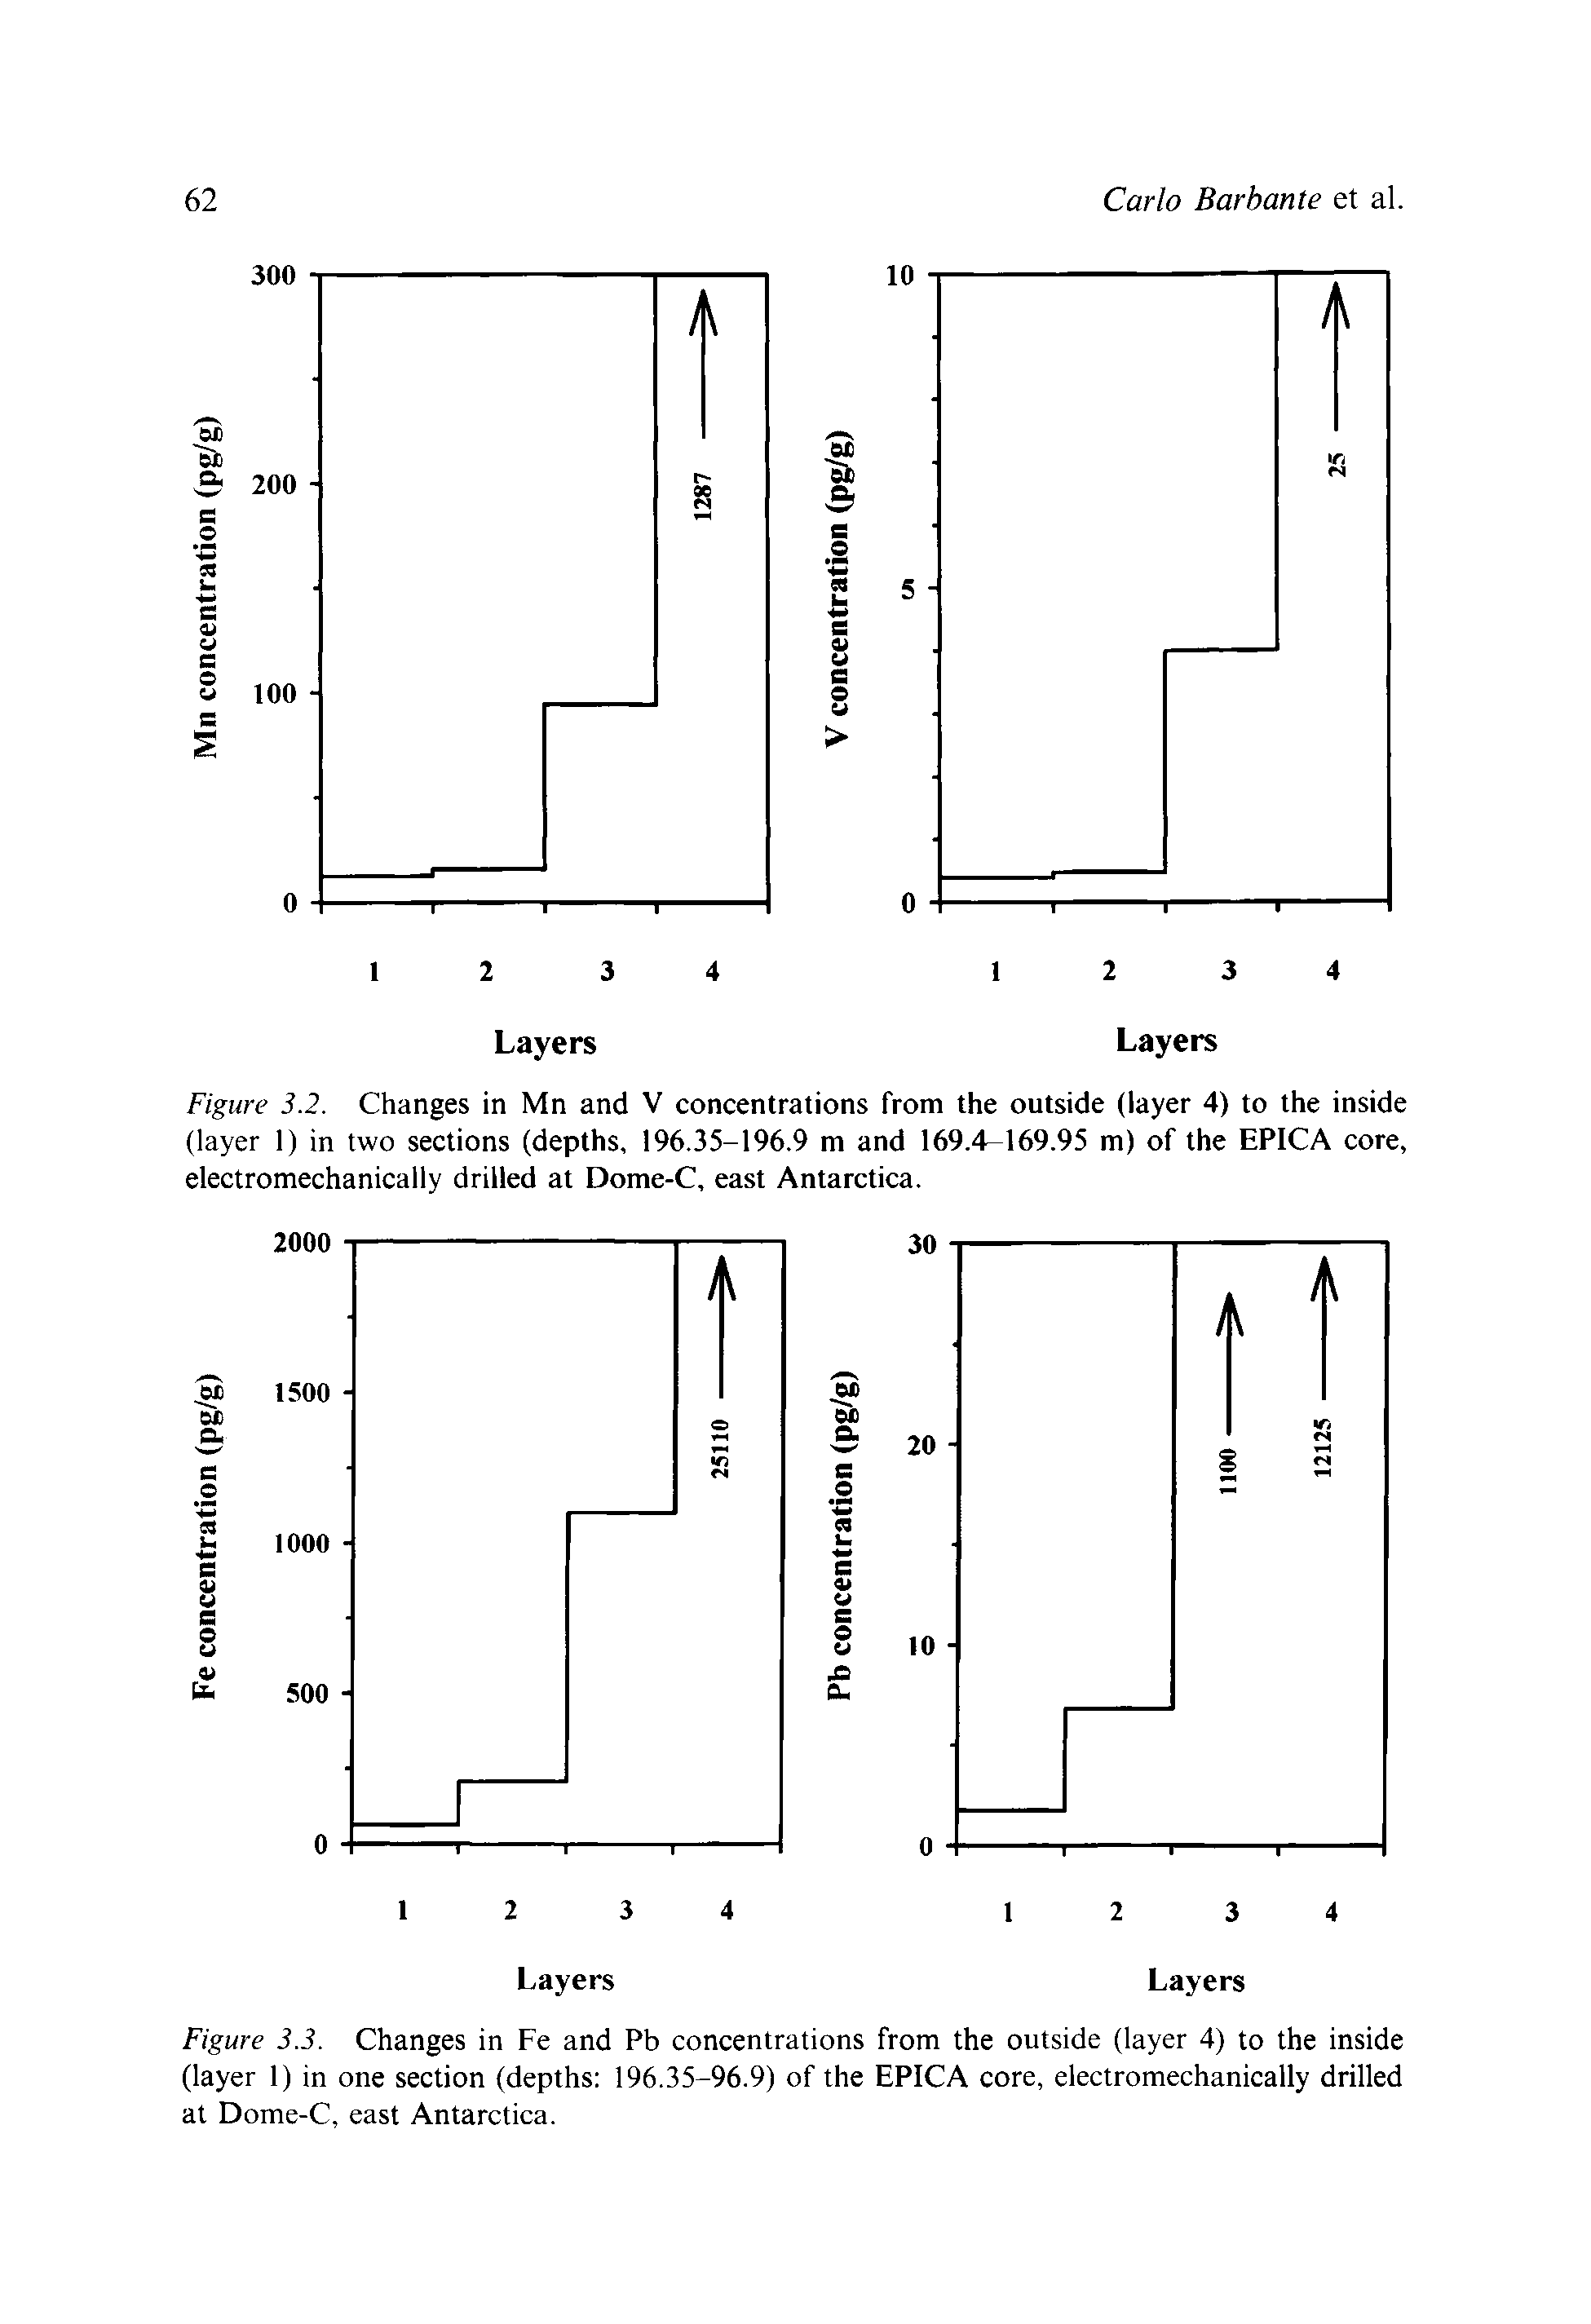 Figure 3.2. Changes in Mn and V concentrations from the outside (layer 4) to the inside (layer 1) in two sections (depths, 196.35-196.9 m and 169.4-169.95 m) of the EPICA core, electromechanically drilled at Dome-C, east Antarctica.